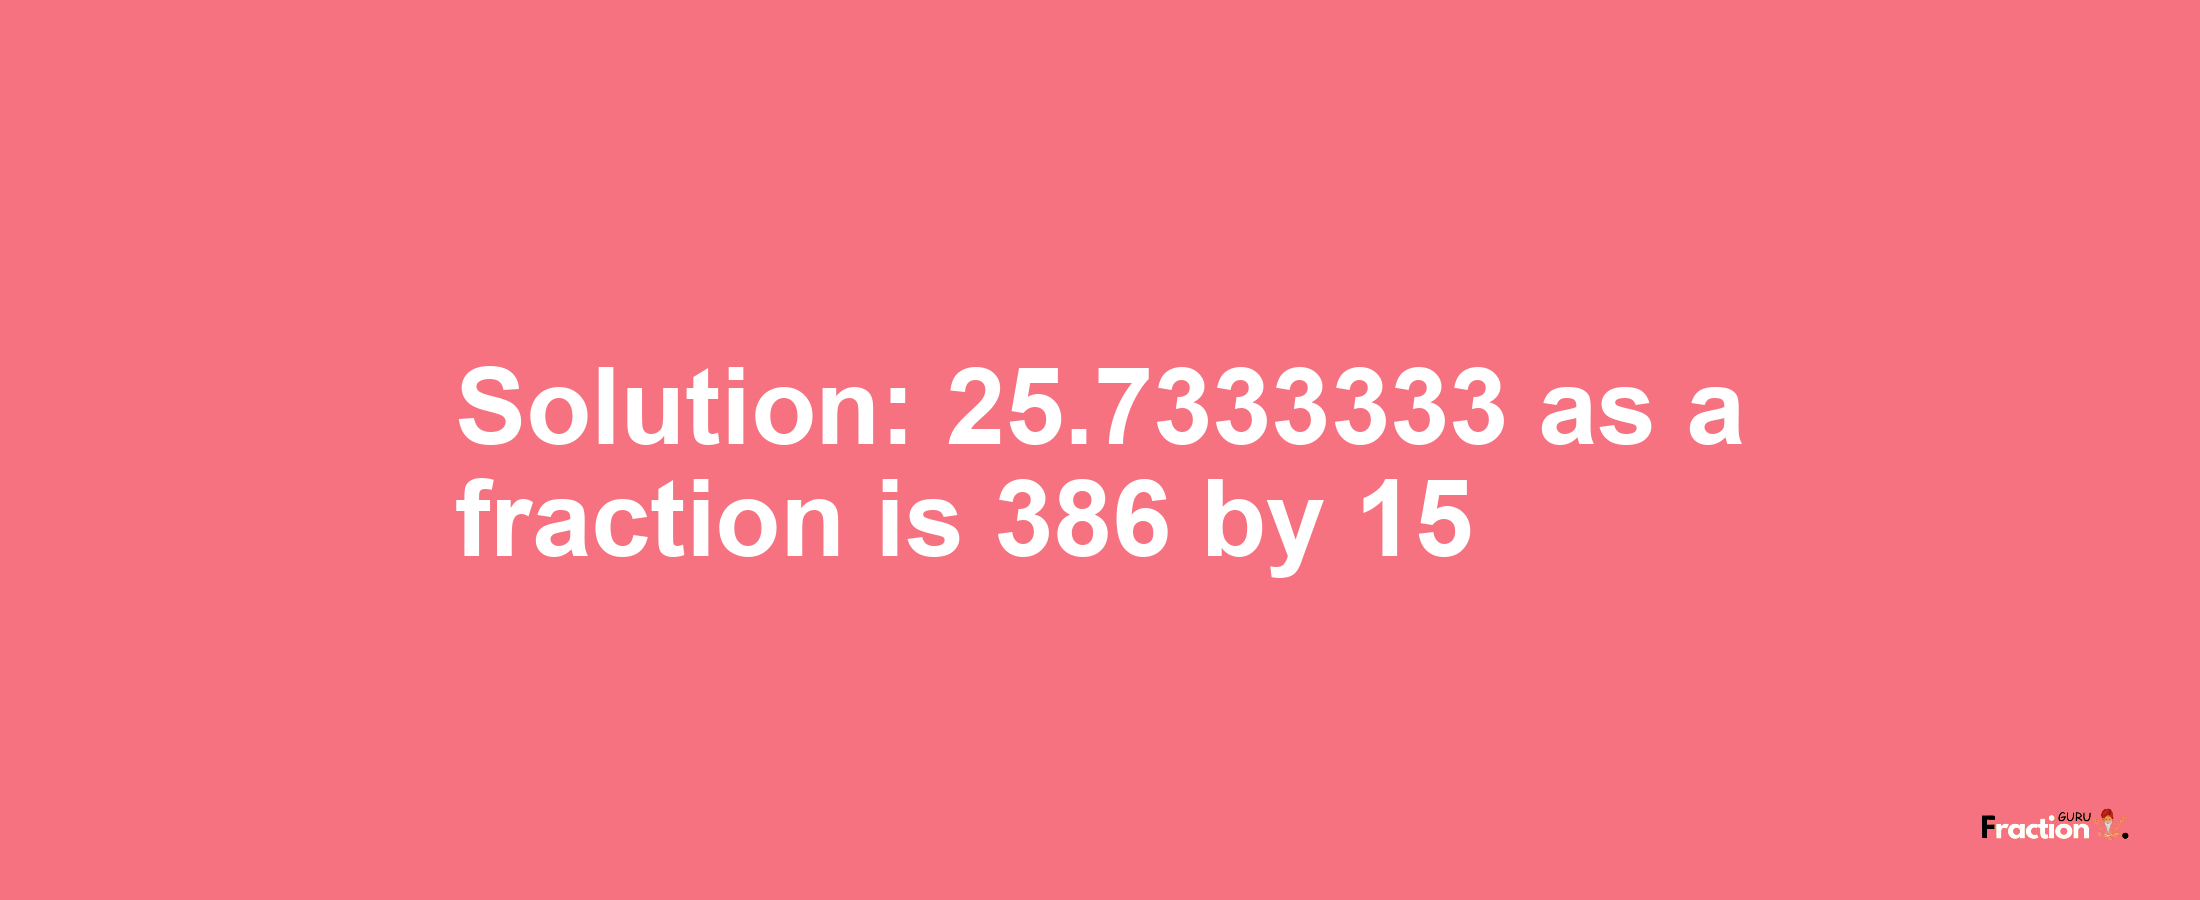 Solution:25.7333333 as a fraction is 386/15